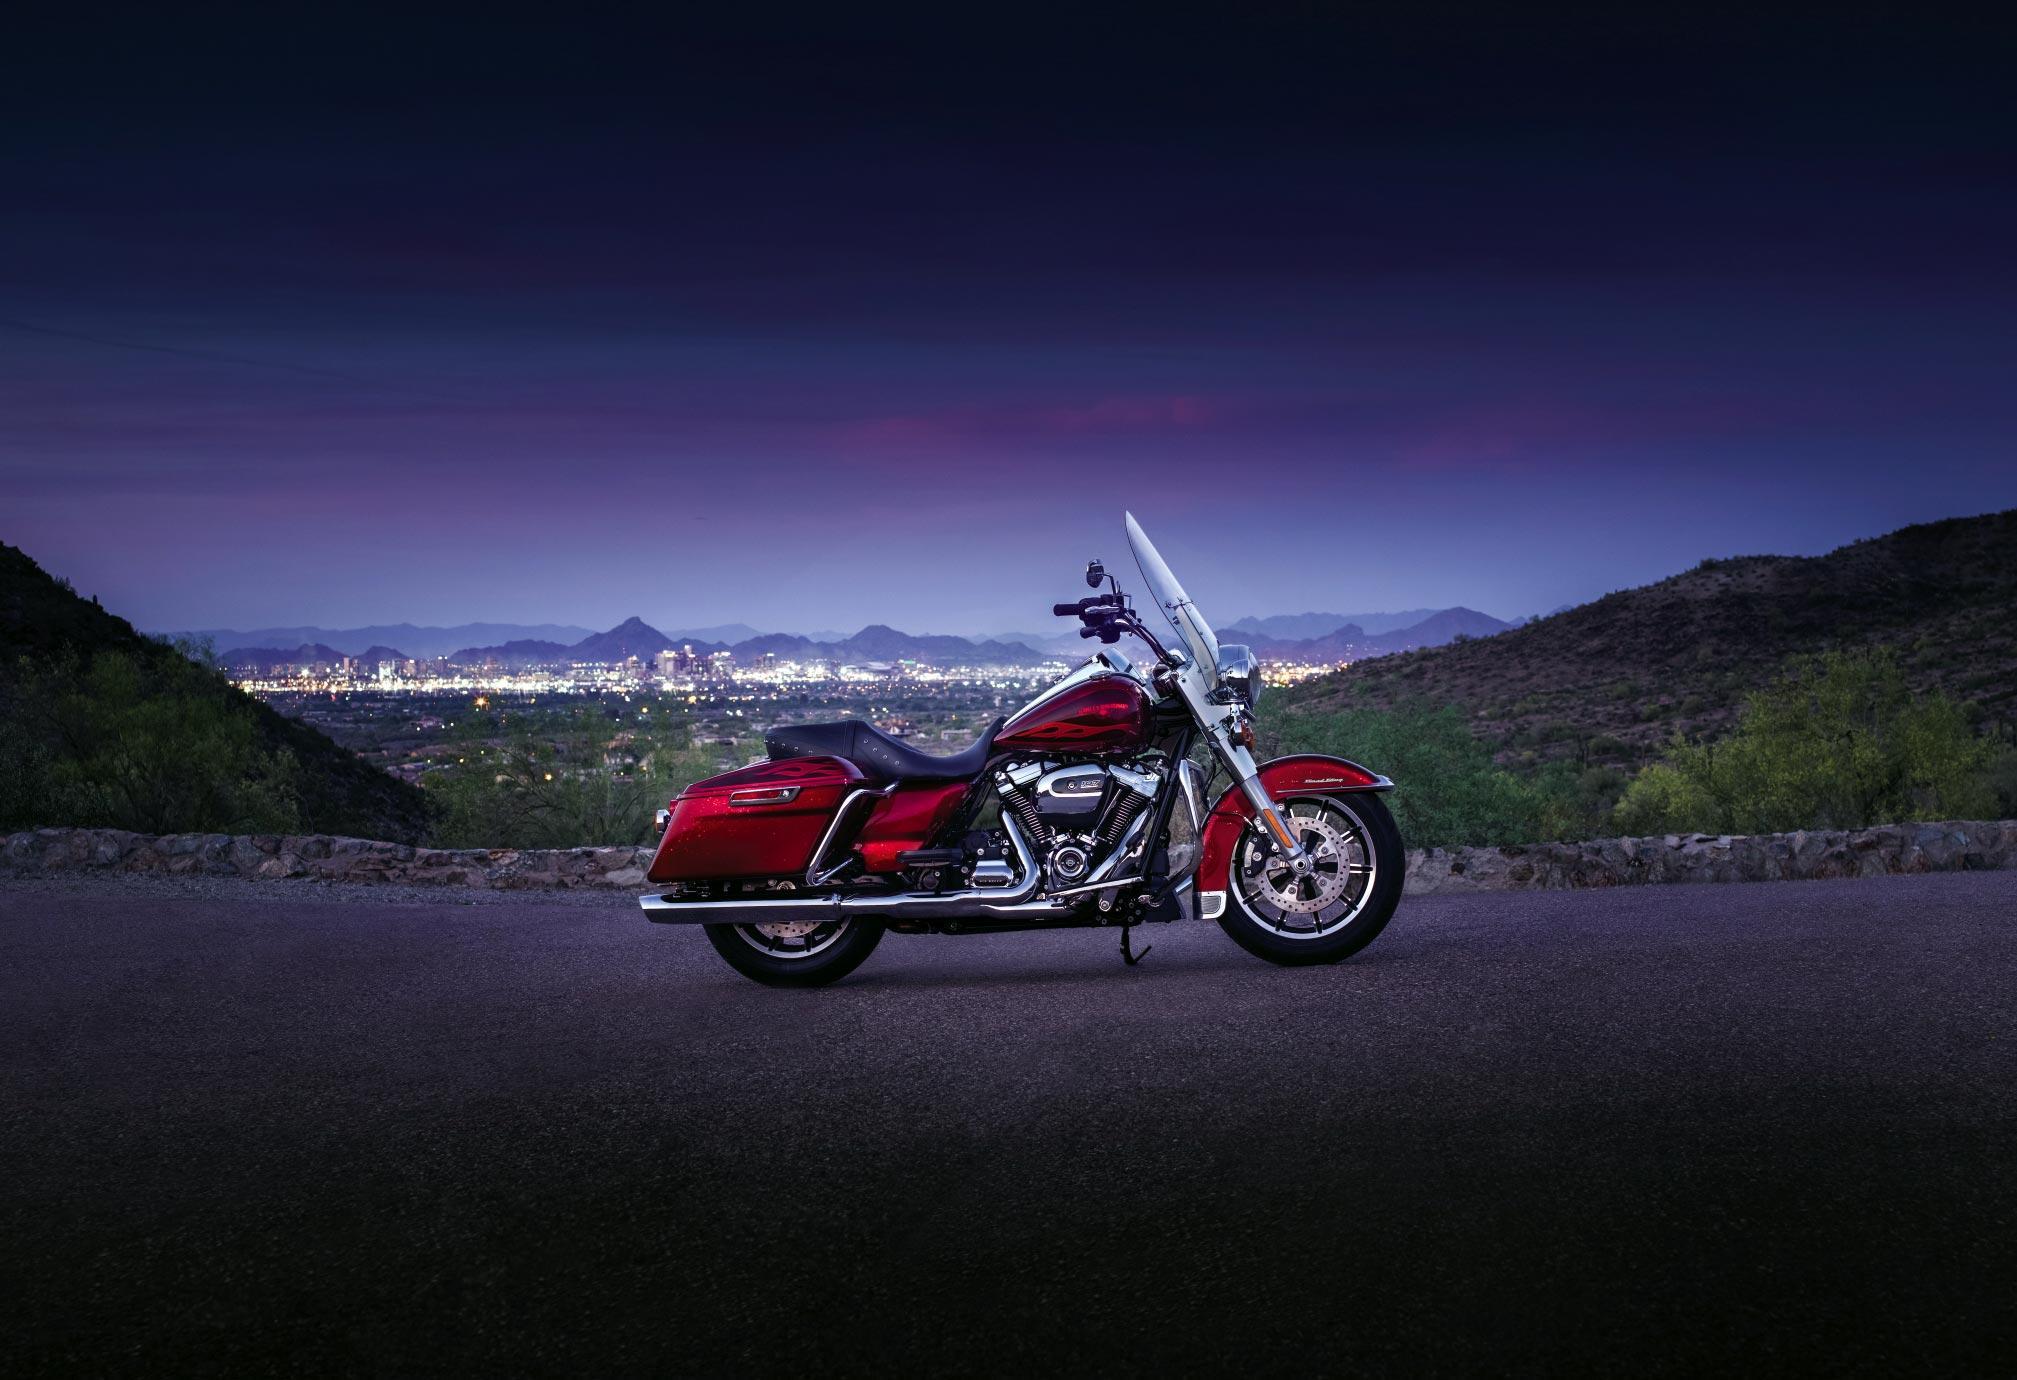 Harley Davidson Road King Full HD Wallpaper And Background